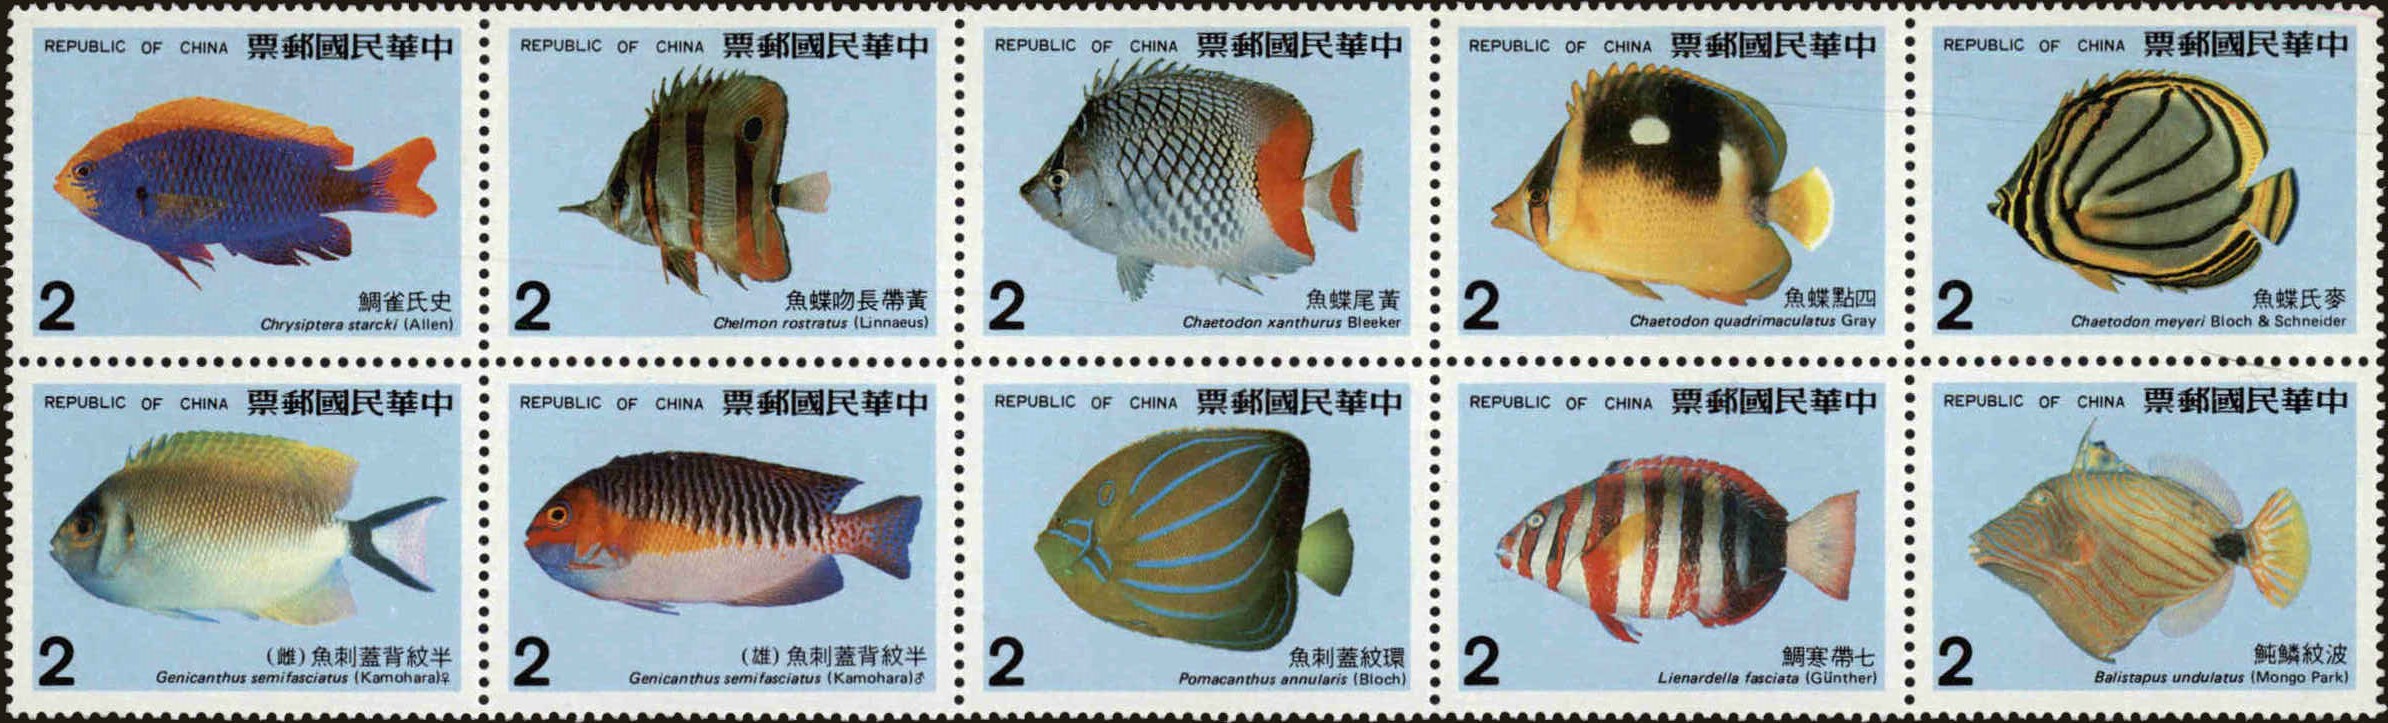 Front view of China and Republic of China 2538 collectors stamp